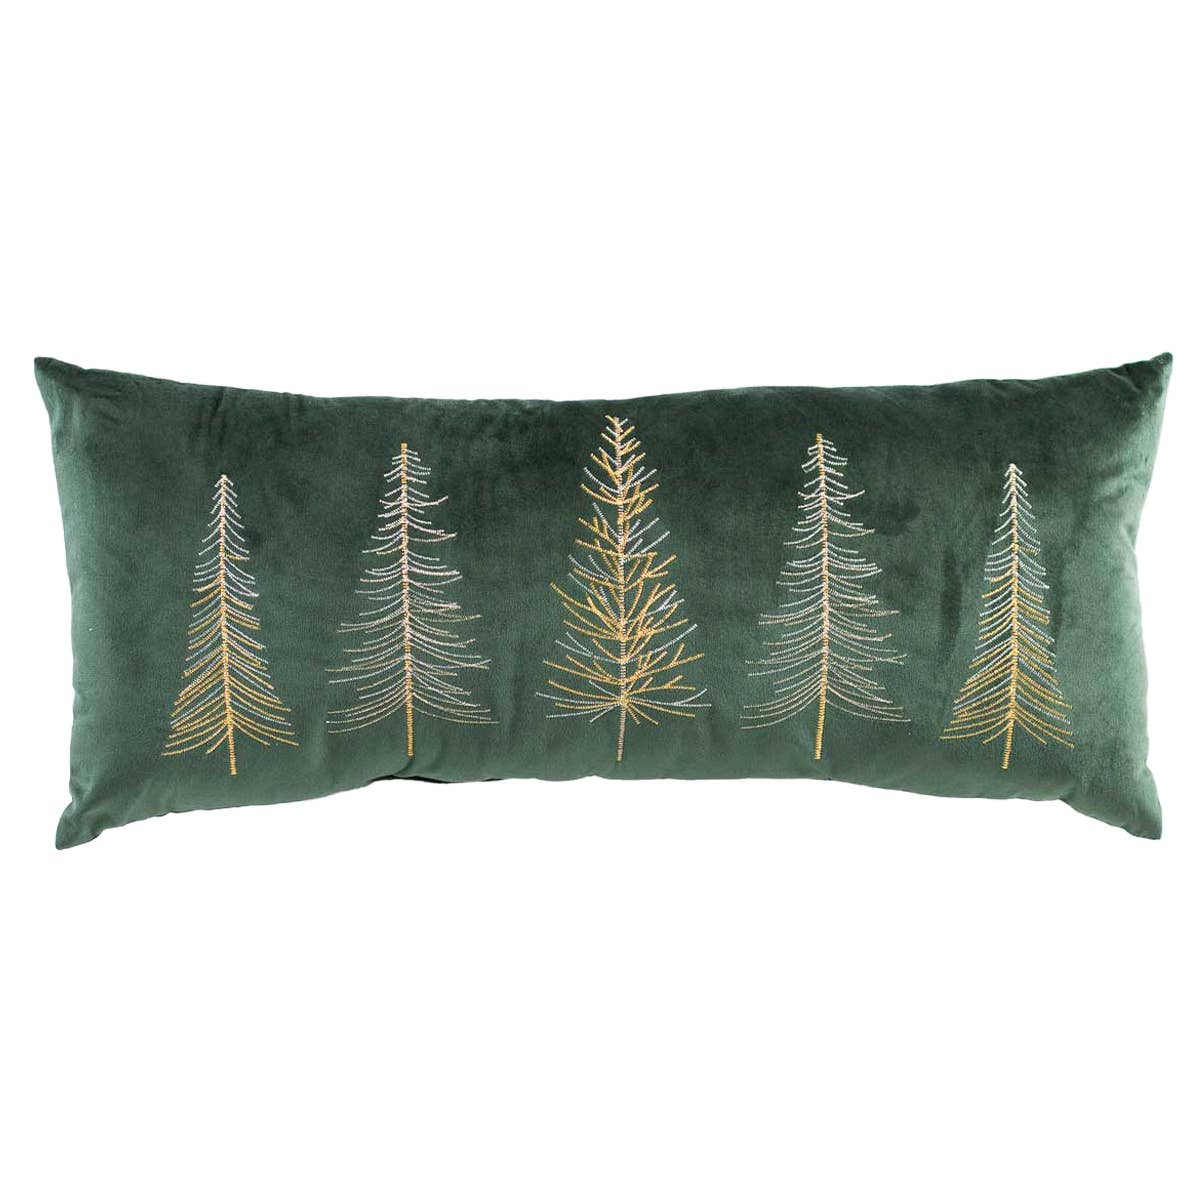 Glimmer Trees Embroidered Pillow   Dark Green/Gold   12x28